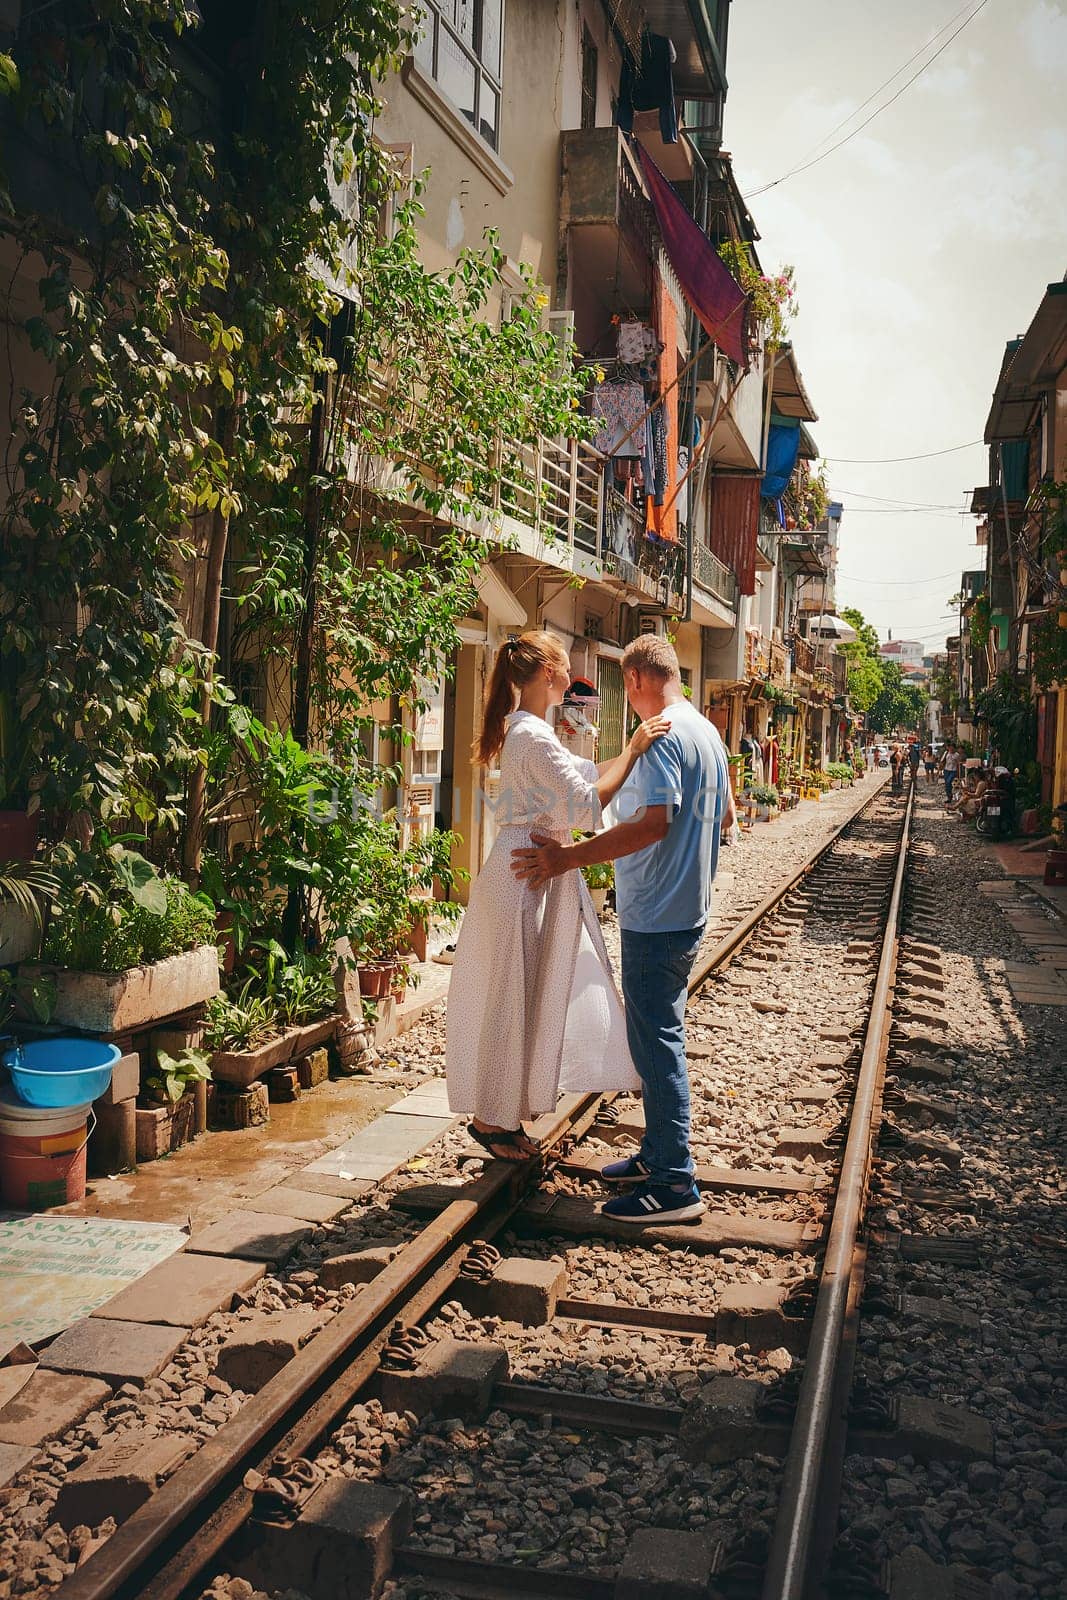 Nothing inspires romance like adventure. a happy couple sharing a romantic moment on the train tracks in the streets of Vietnam